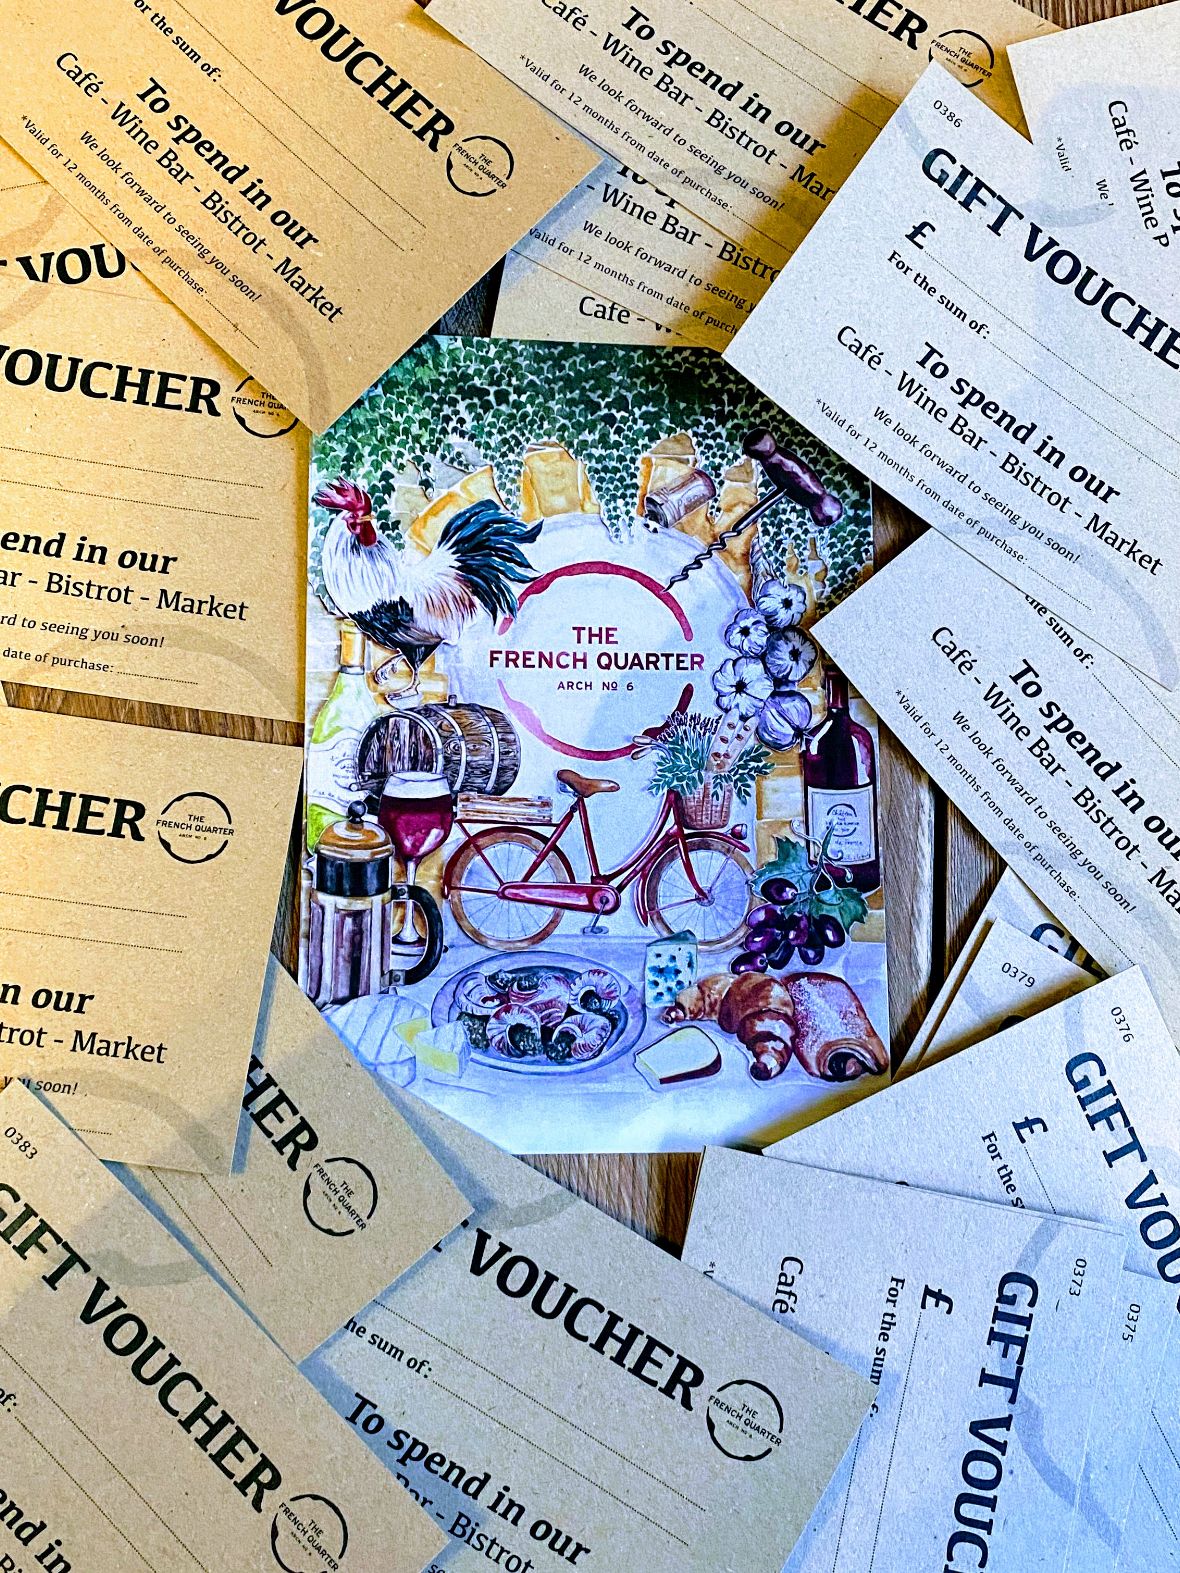 Collection of The French Quarter gift vouchers